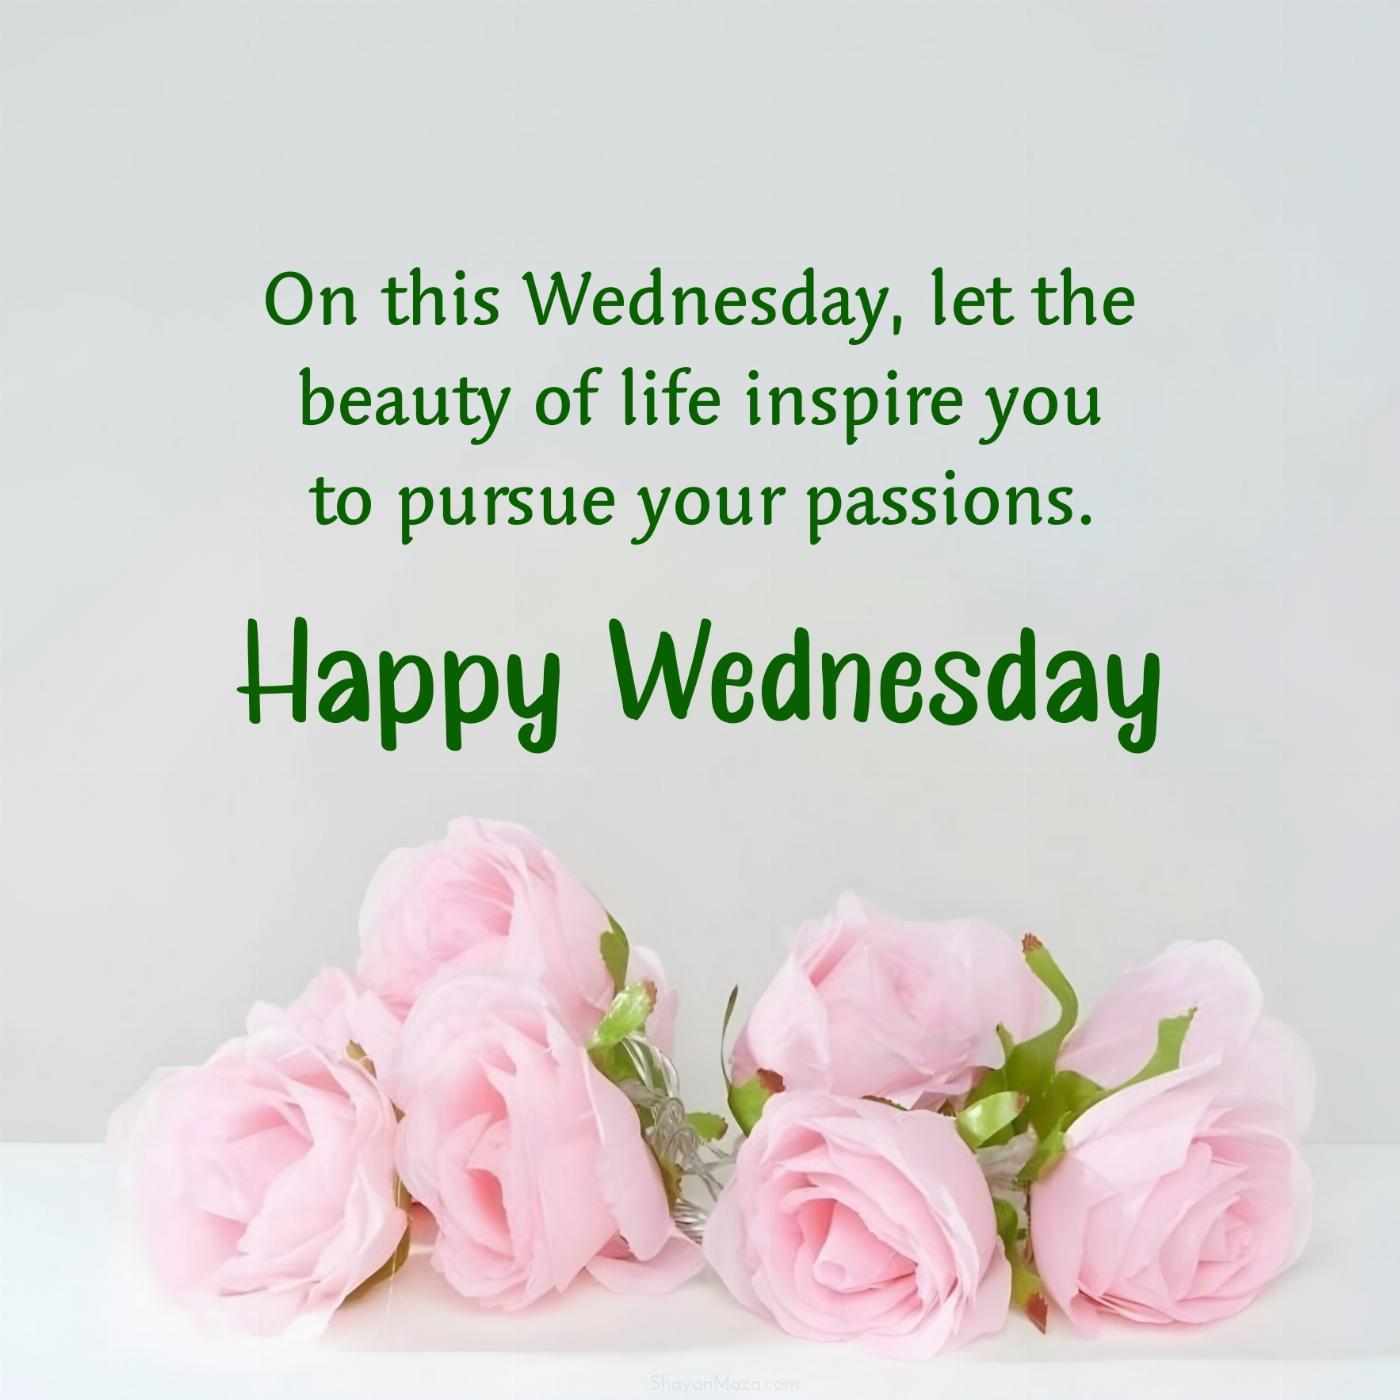 On this Wednesday let the beauty of life inspire you to pursue your passions